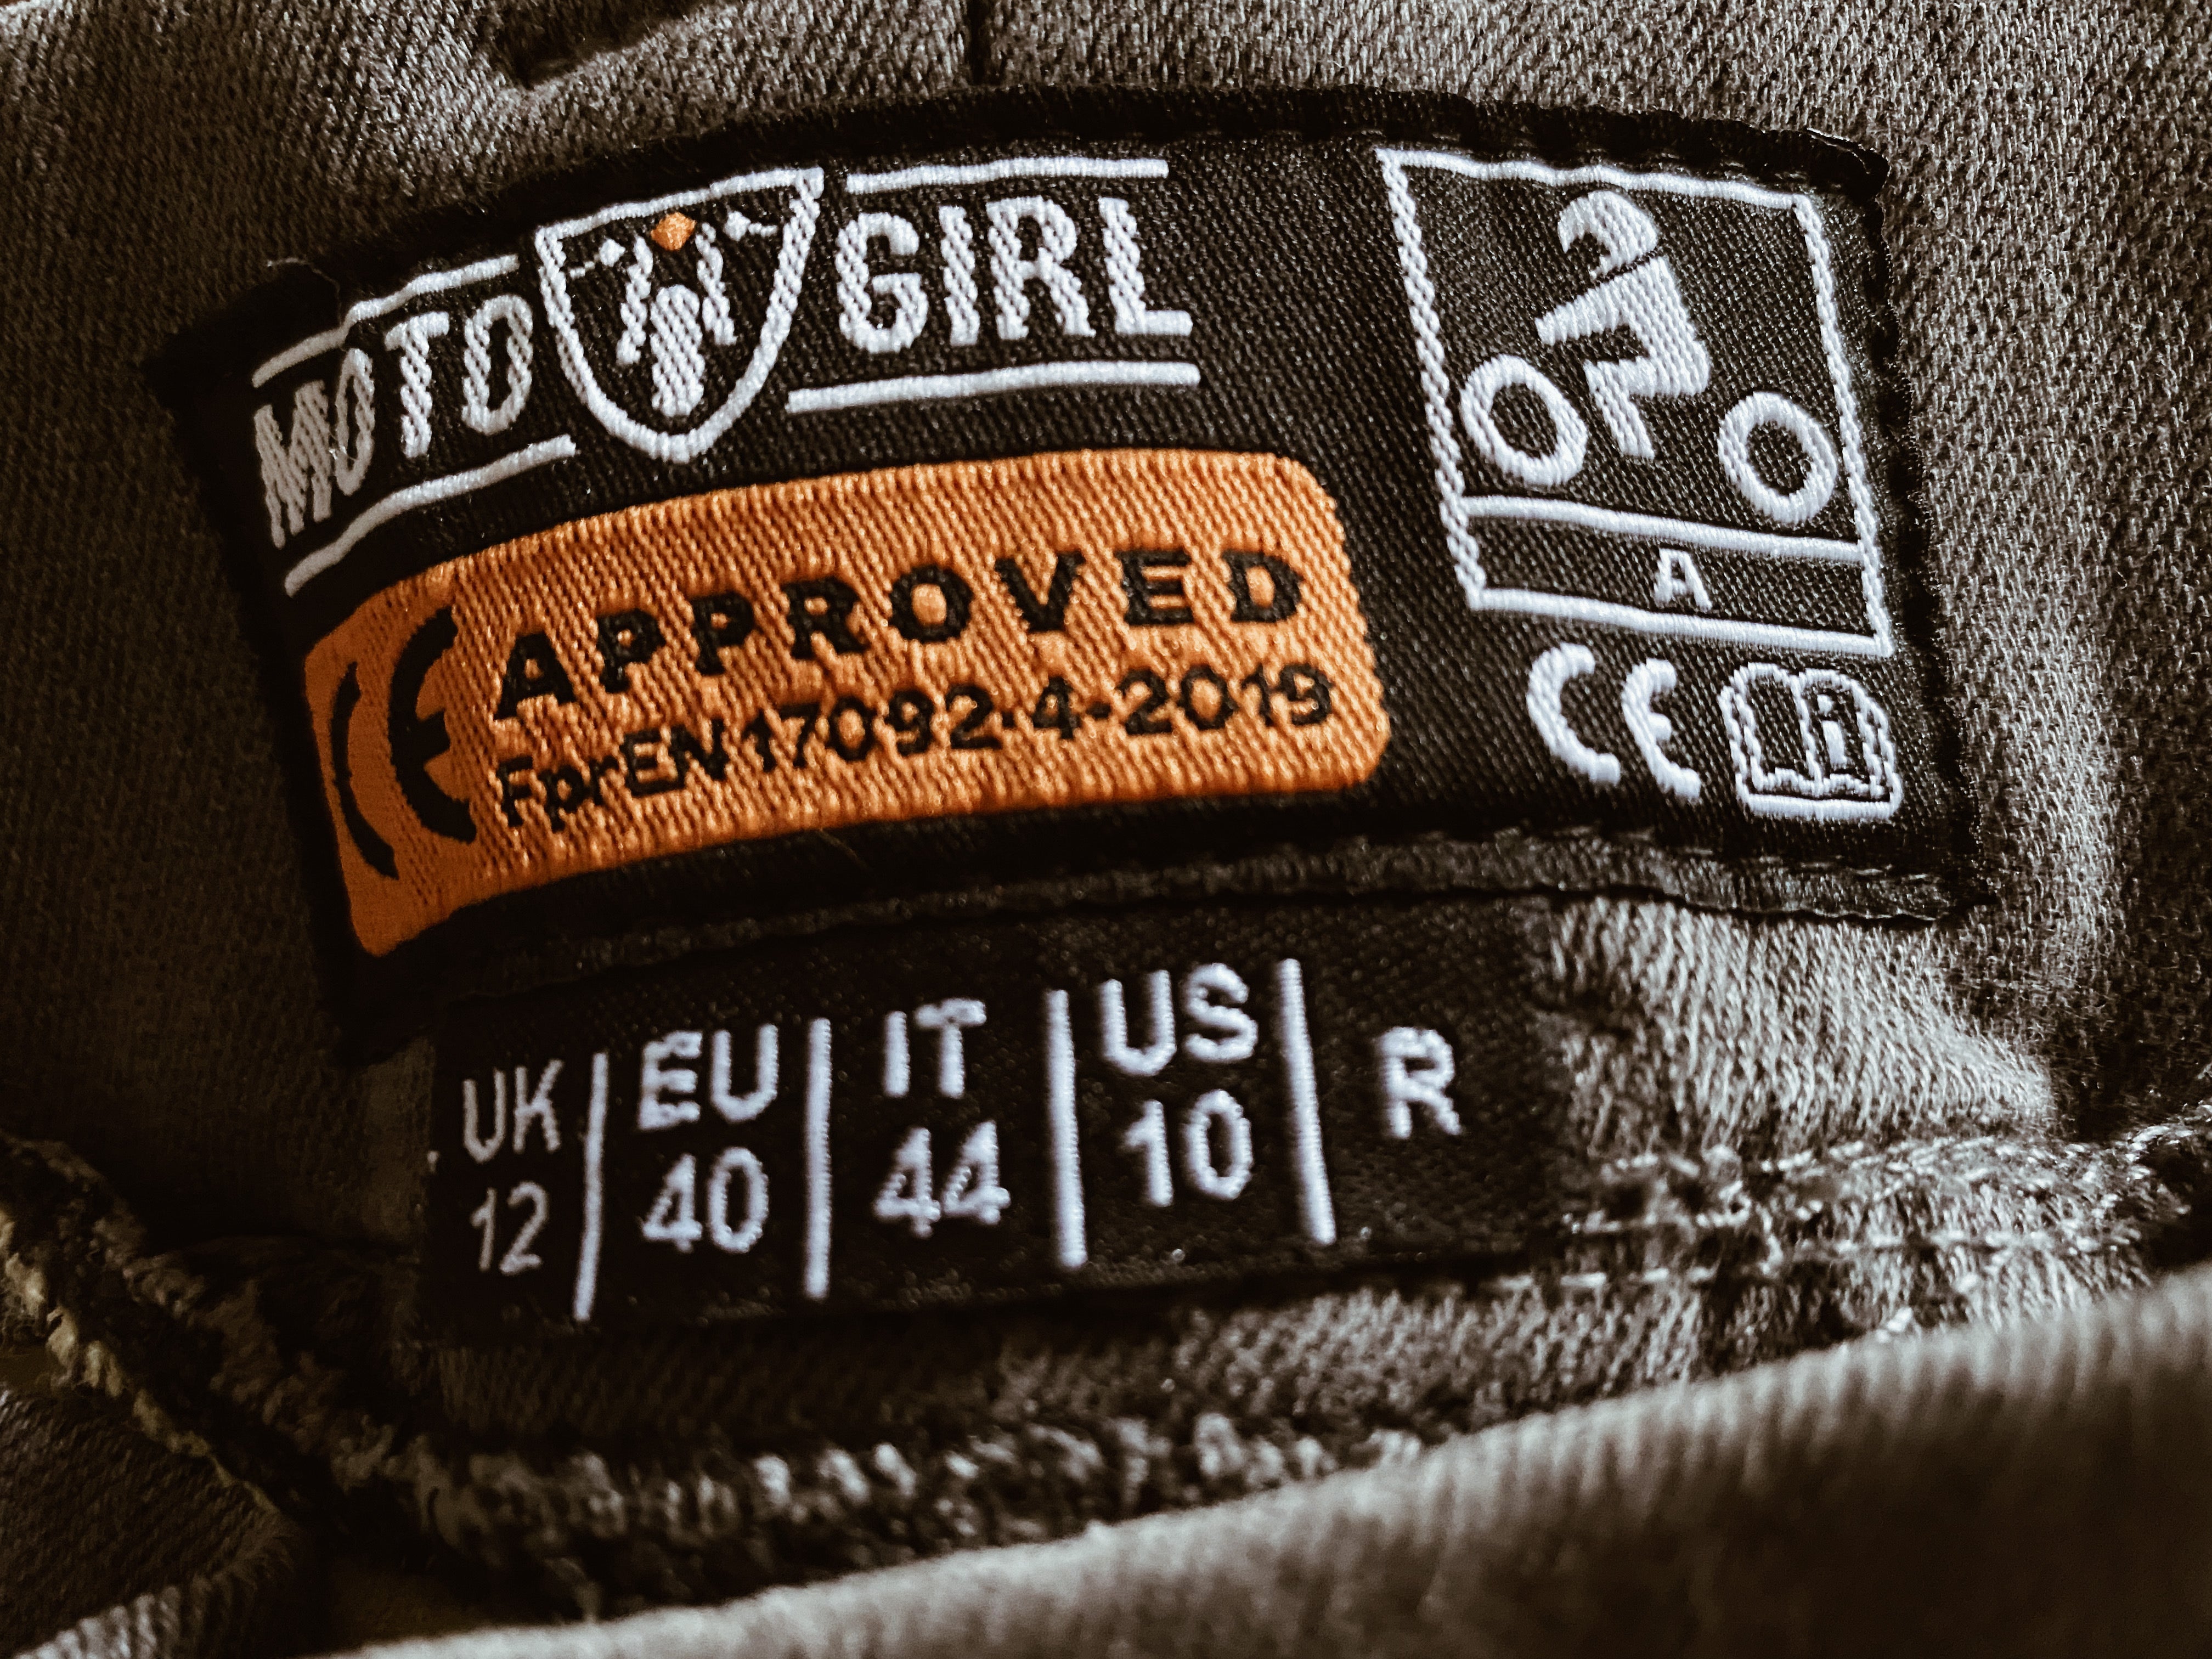 The label with CE certification on the MotoGirl women's motorcycle jeans